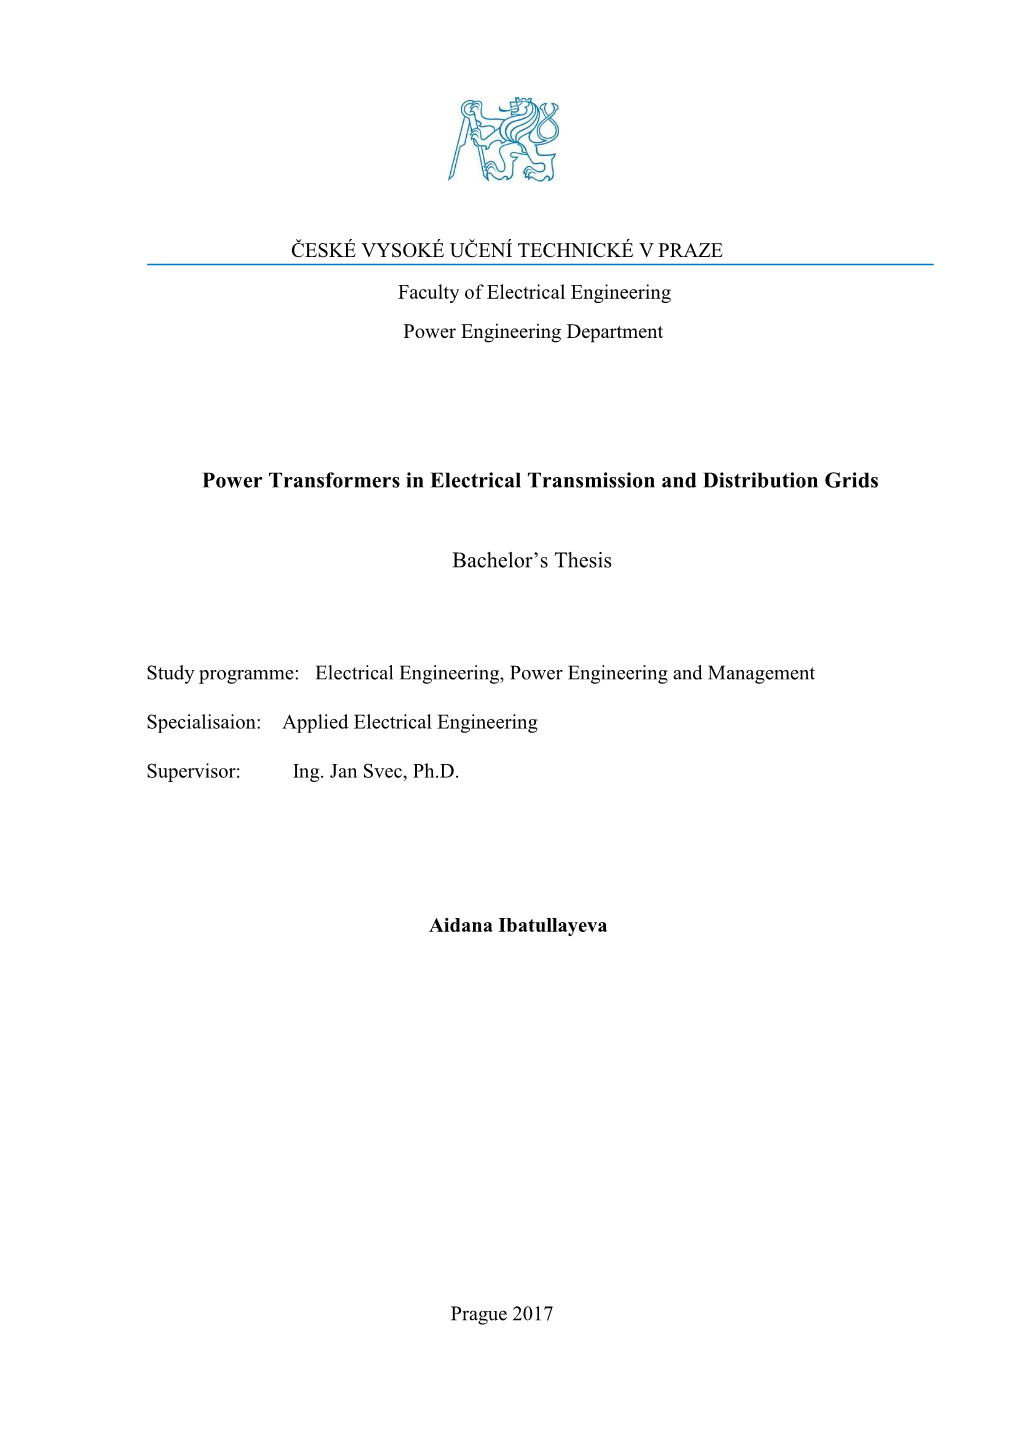 Power Transformers in Electrical Transmission and Distribution Grids